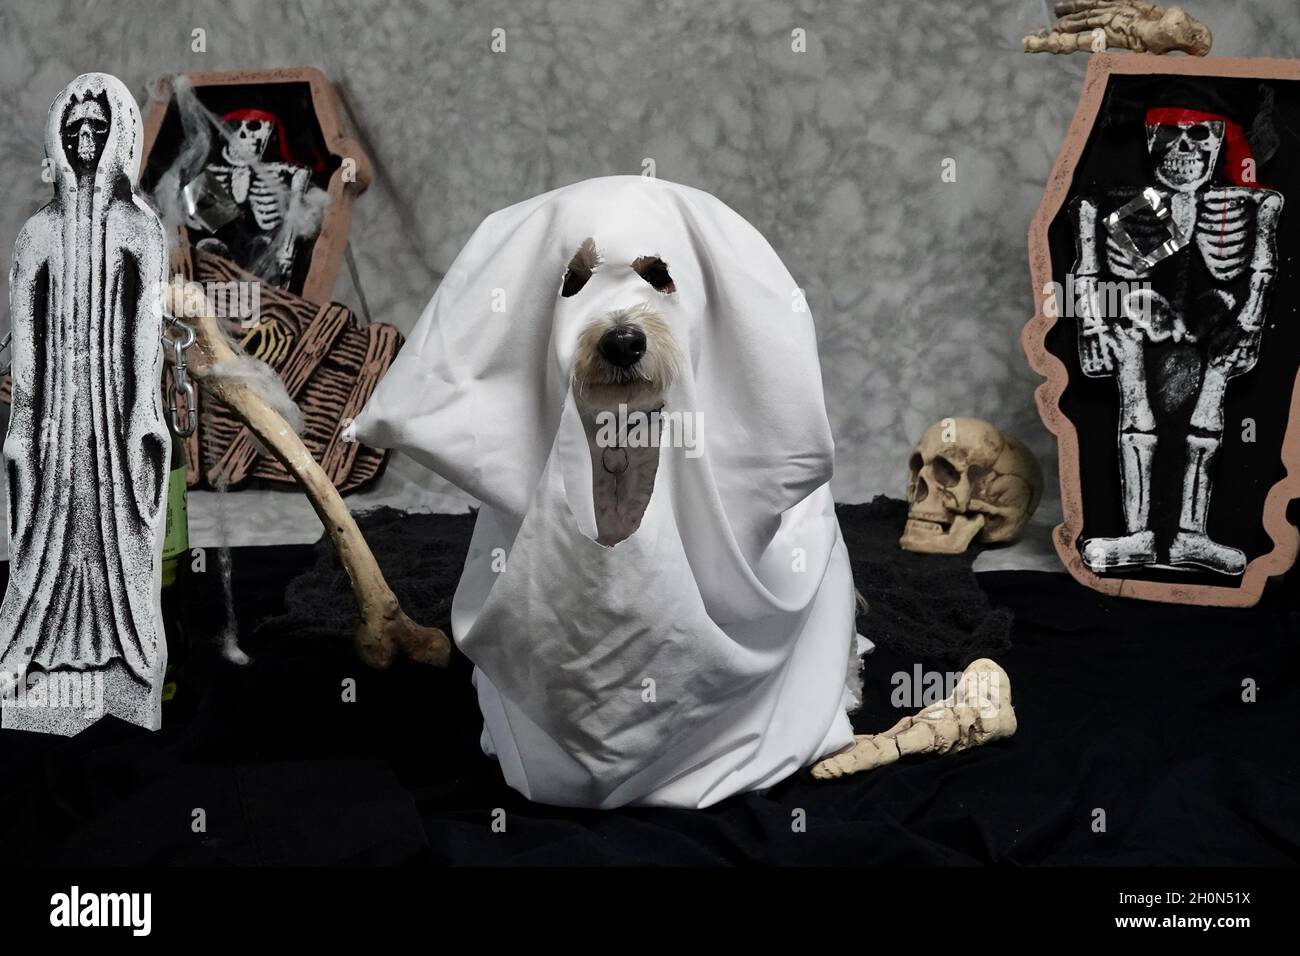 A cute dog wears a sheet with holes cut out as a ghost costume with scary props in the background for Halloween. Stock Photo